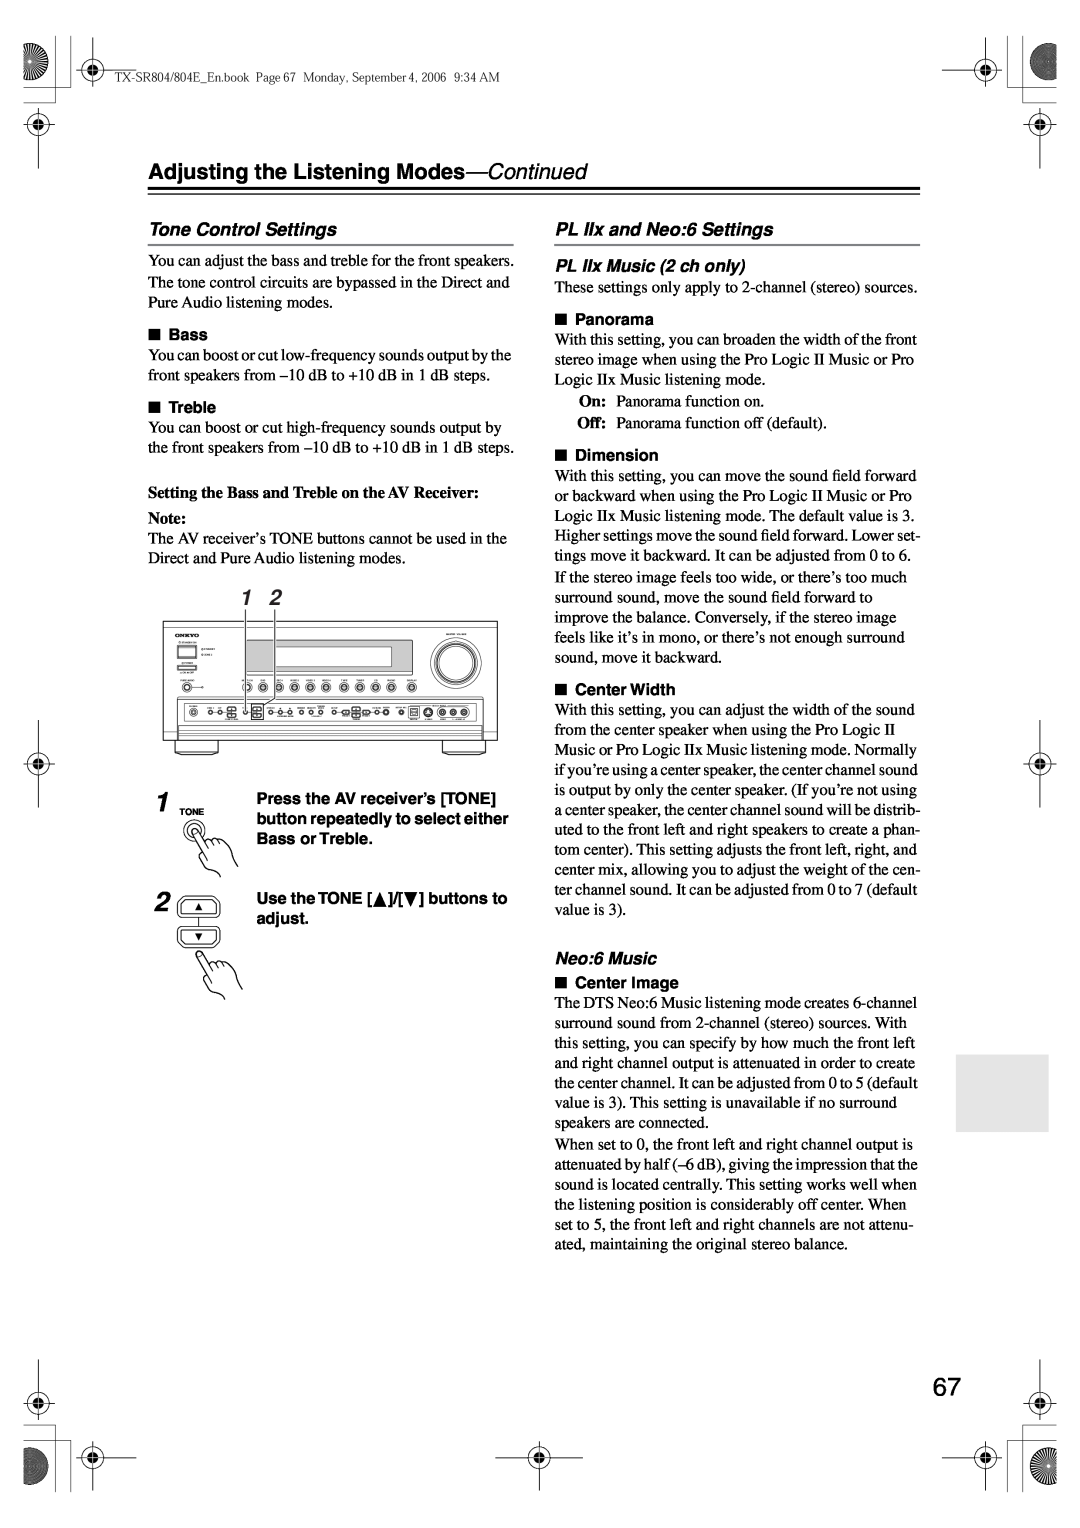 Onkyo TX-SR804E instruction manual Adjusting the Listening Modes—Continued, Tone Control Settings, Neo:6 Music 